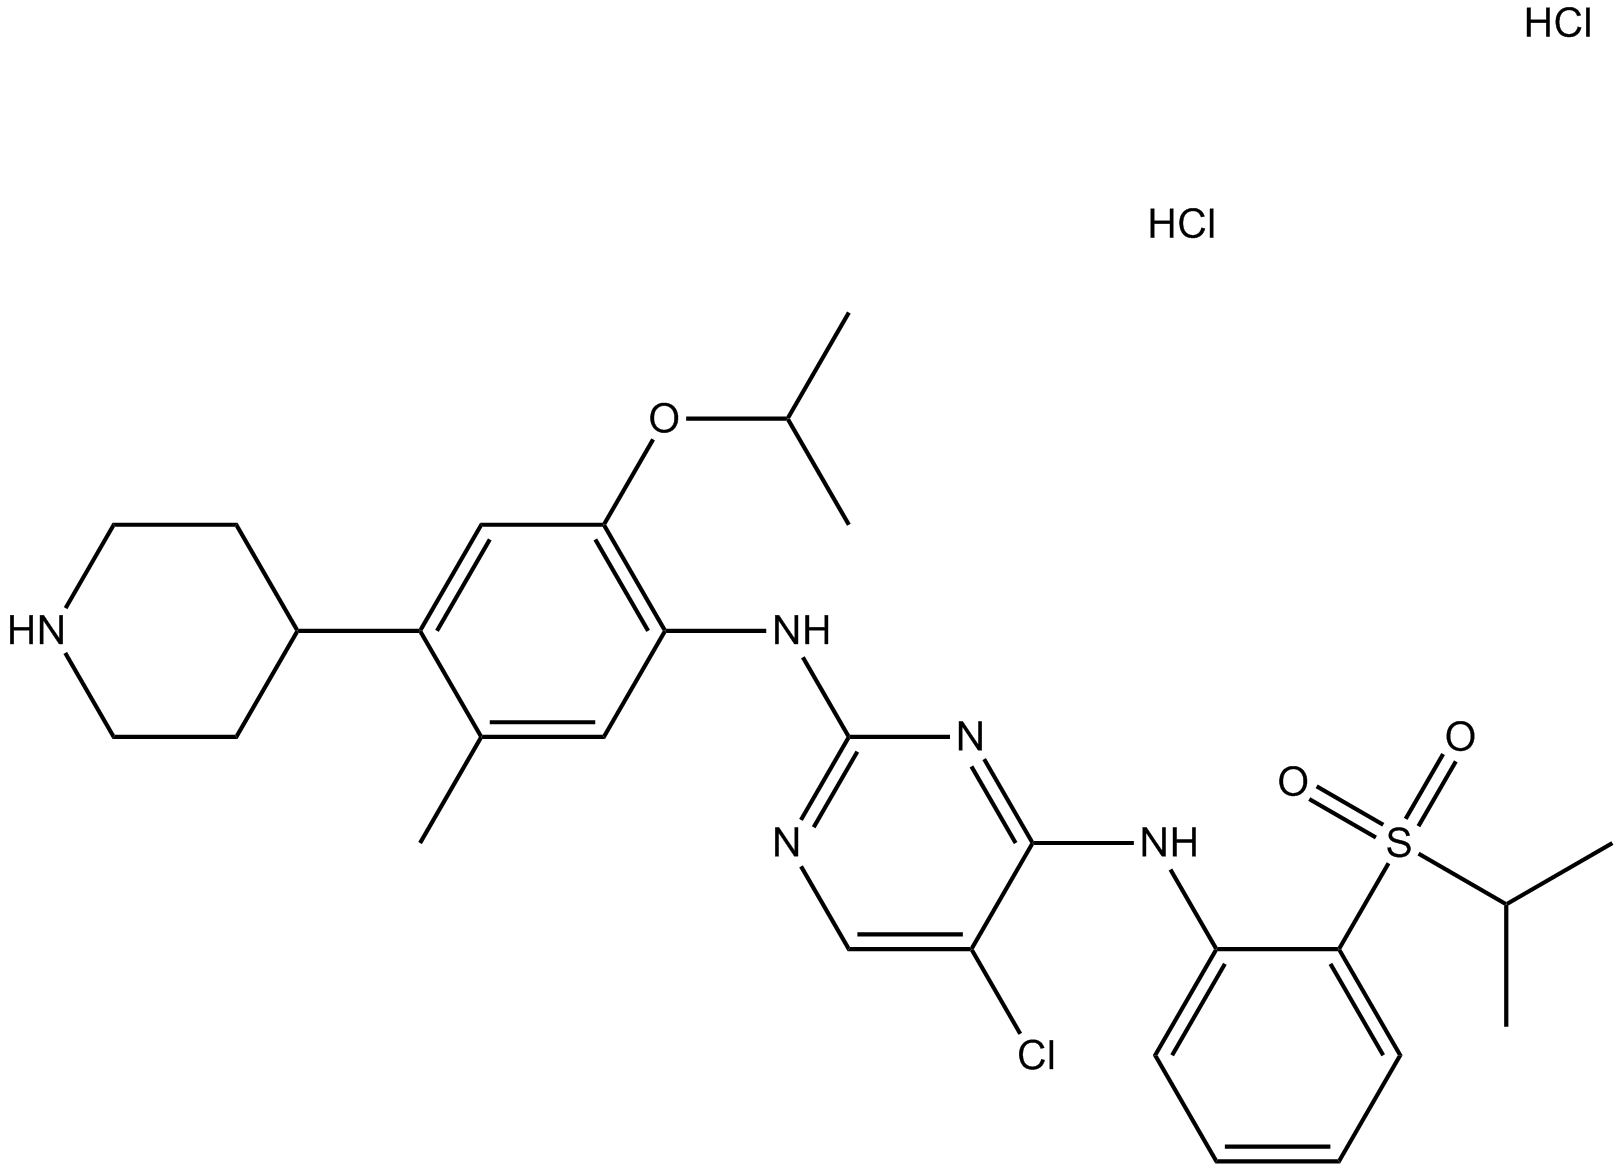 LDK378 dihydrochloride  Chemical Structure